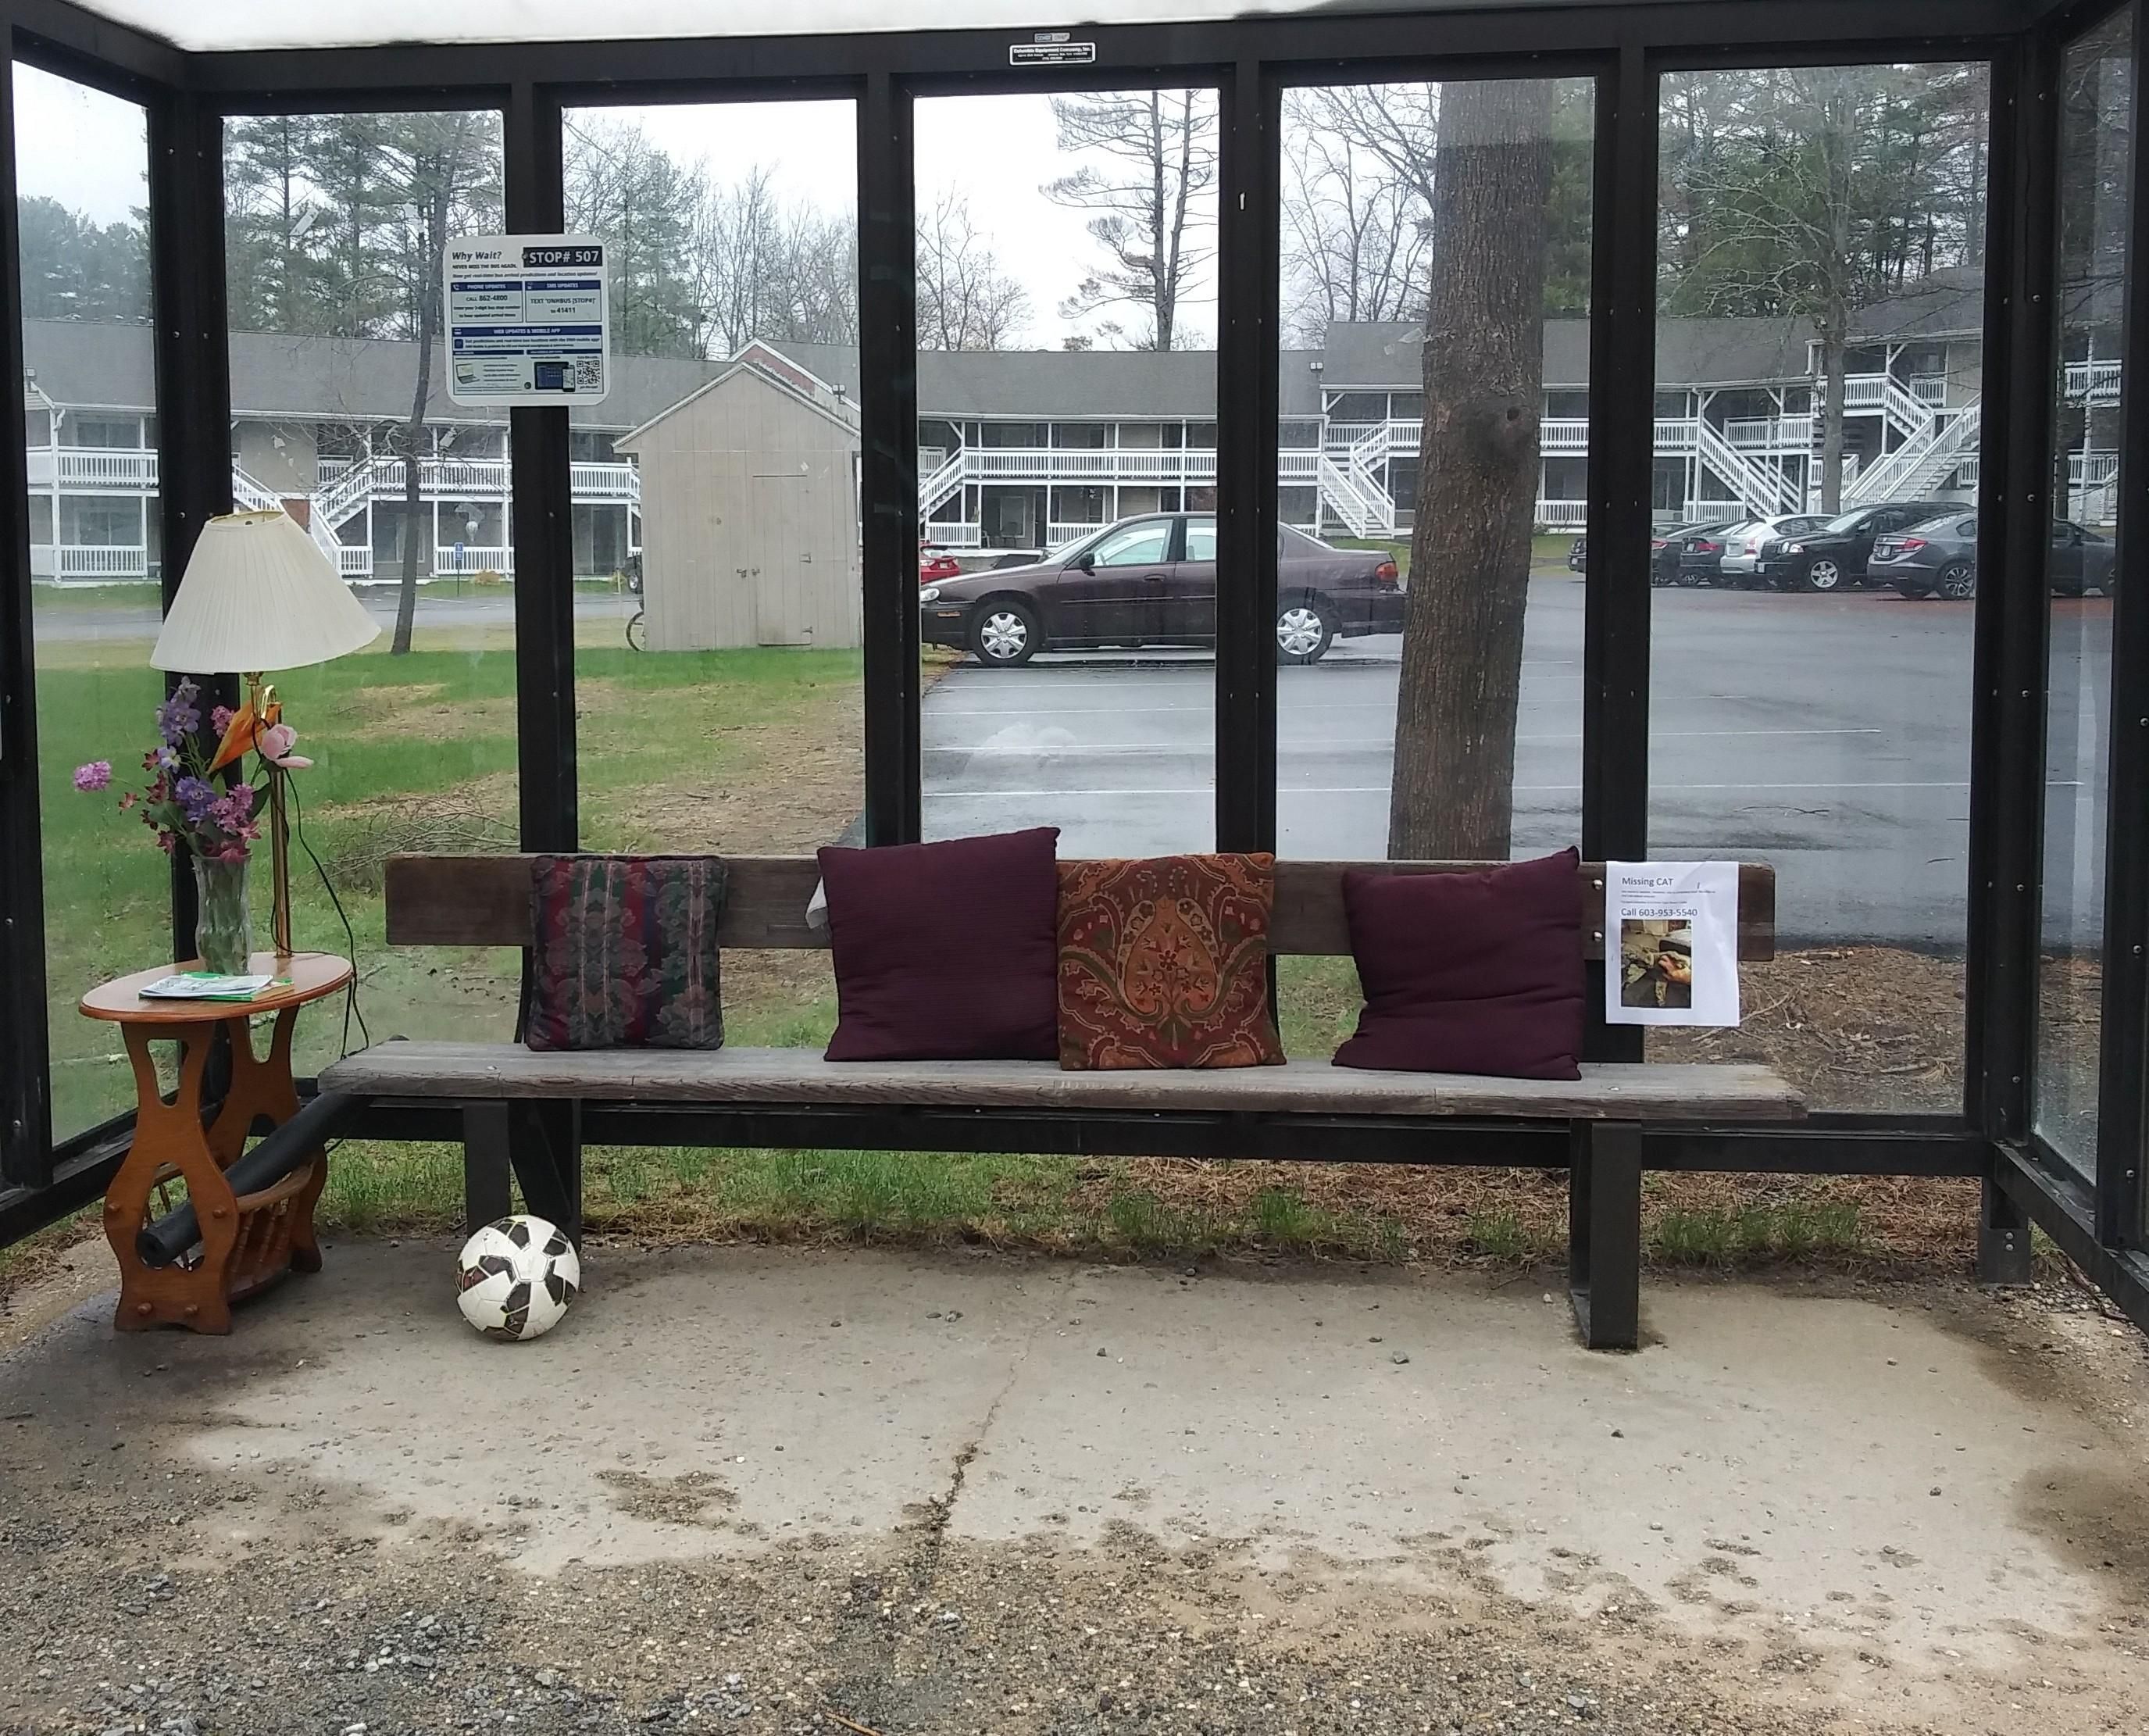 This bus stop near me is getting pretty cozy